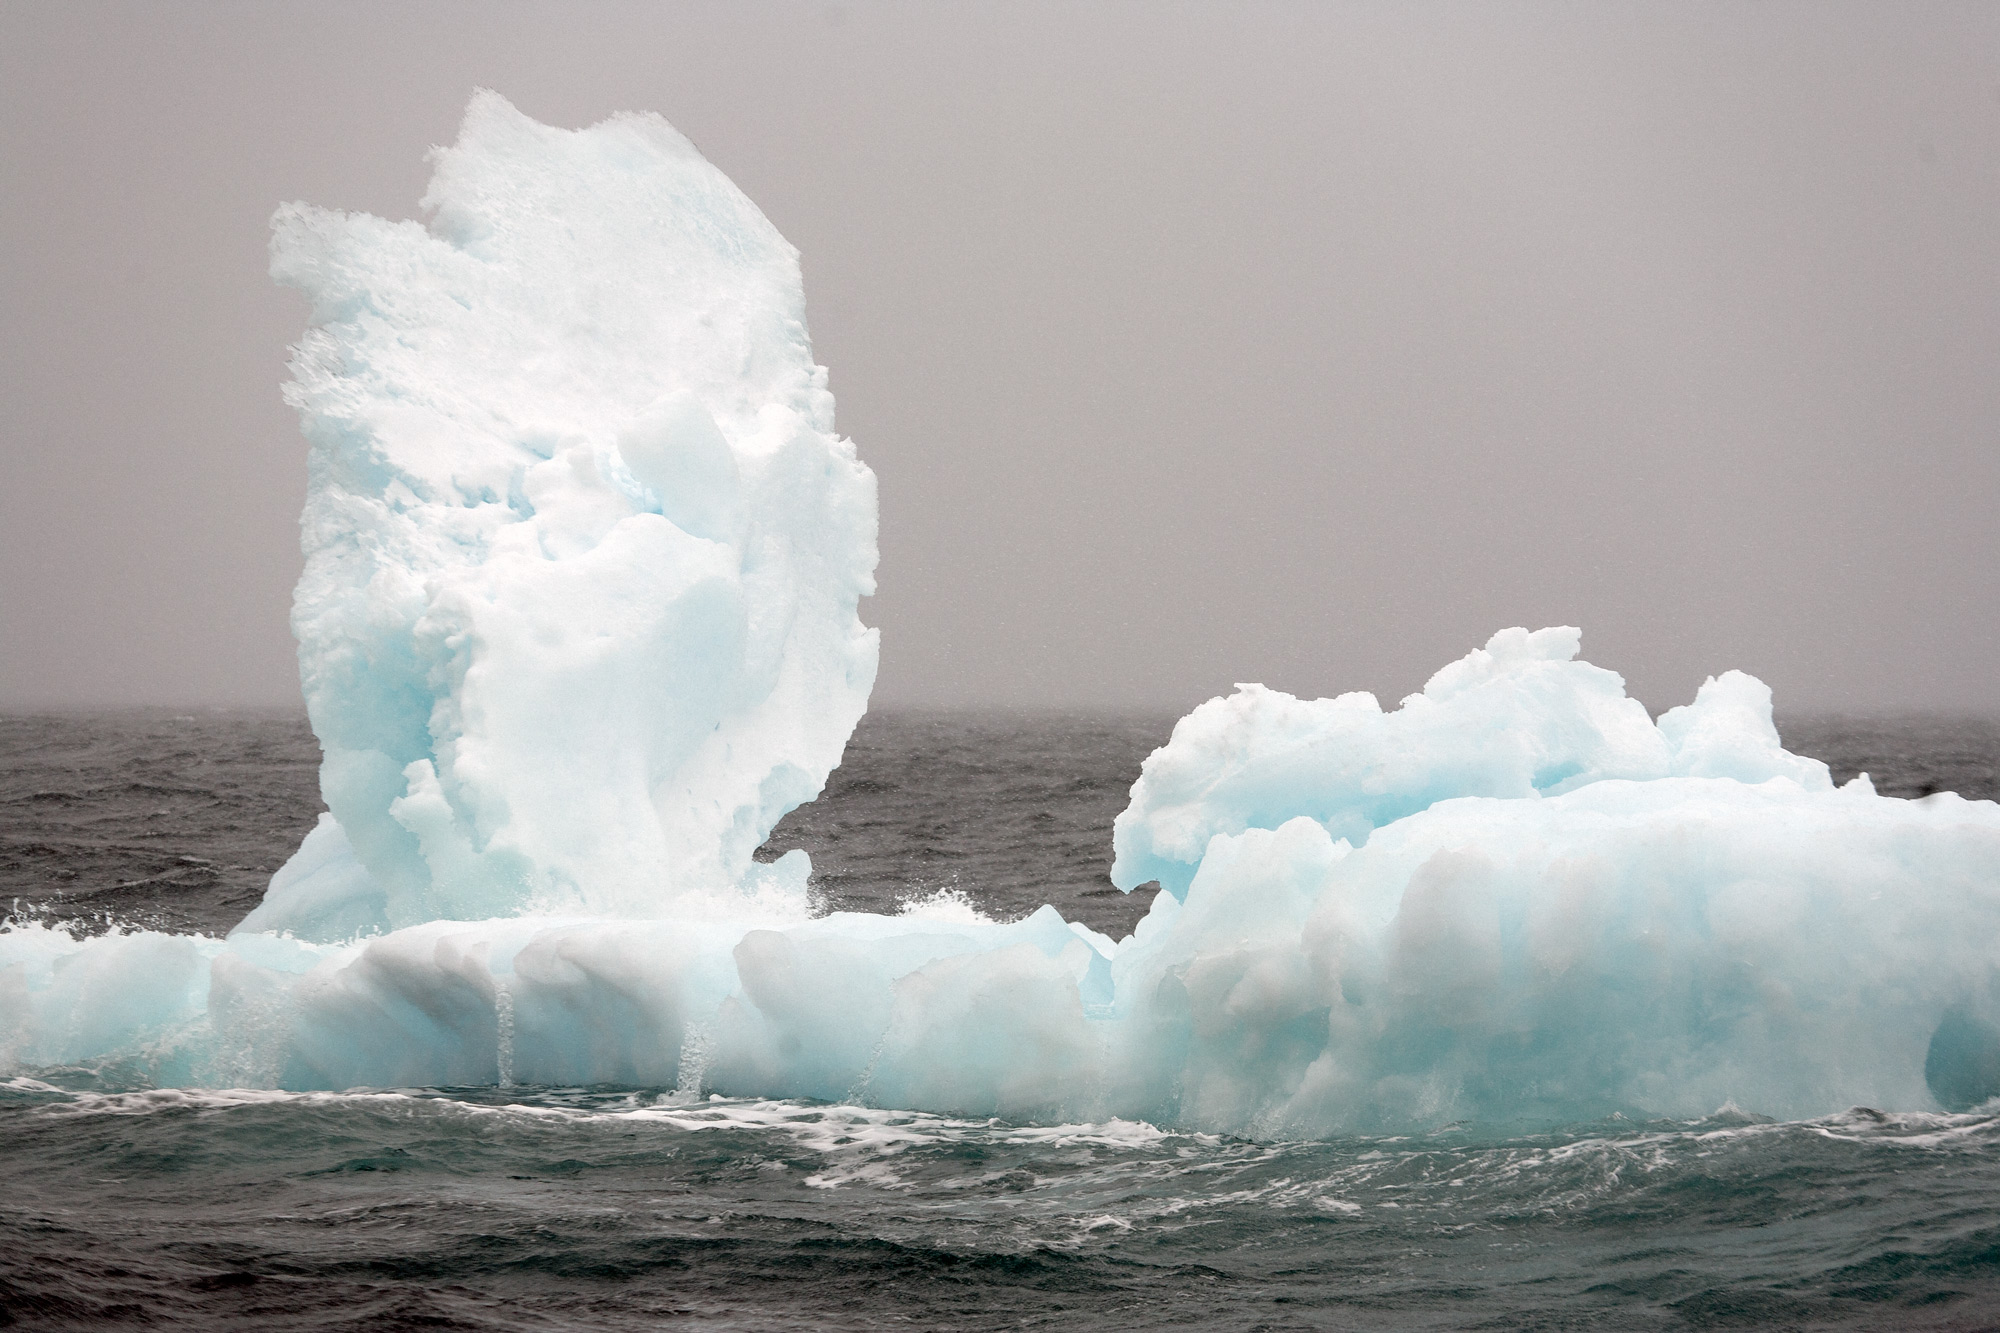 Iceberg sculpted by the wind